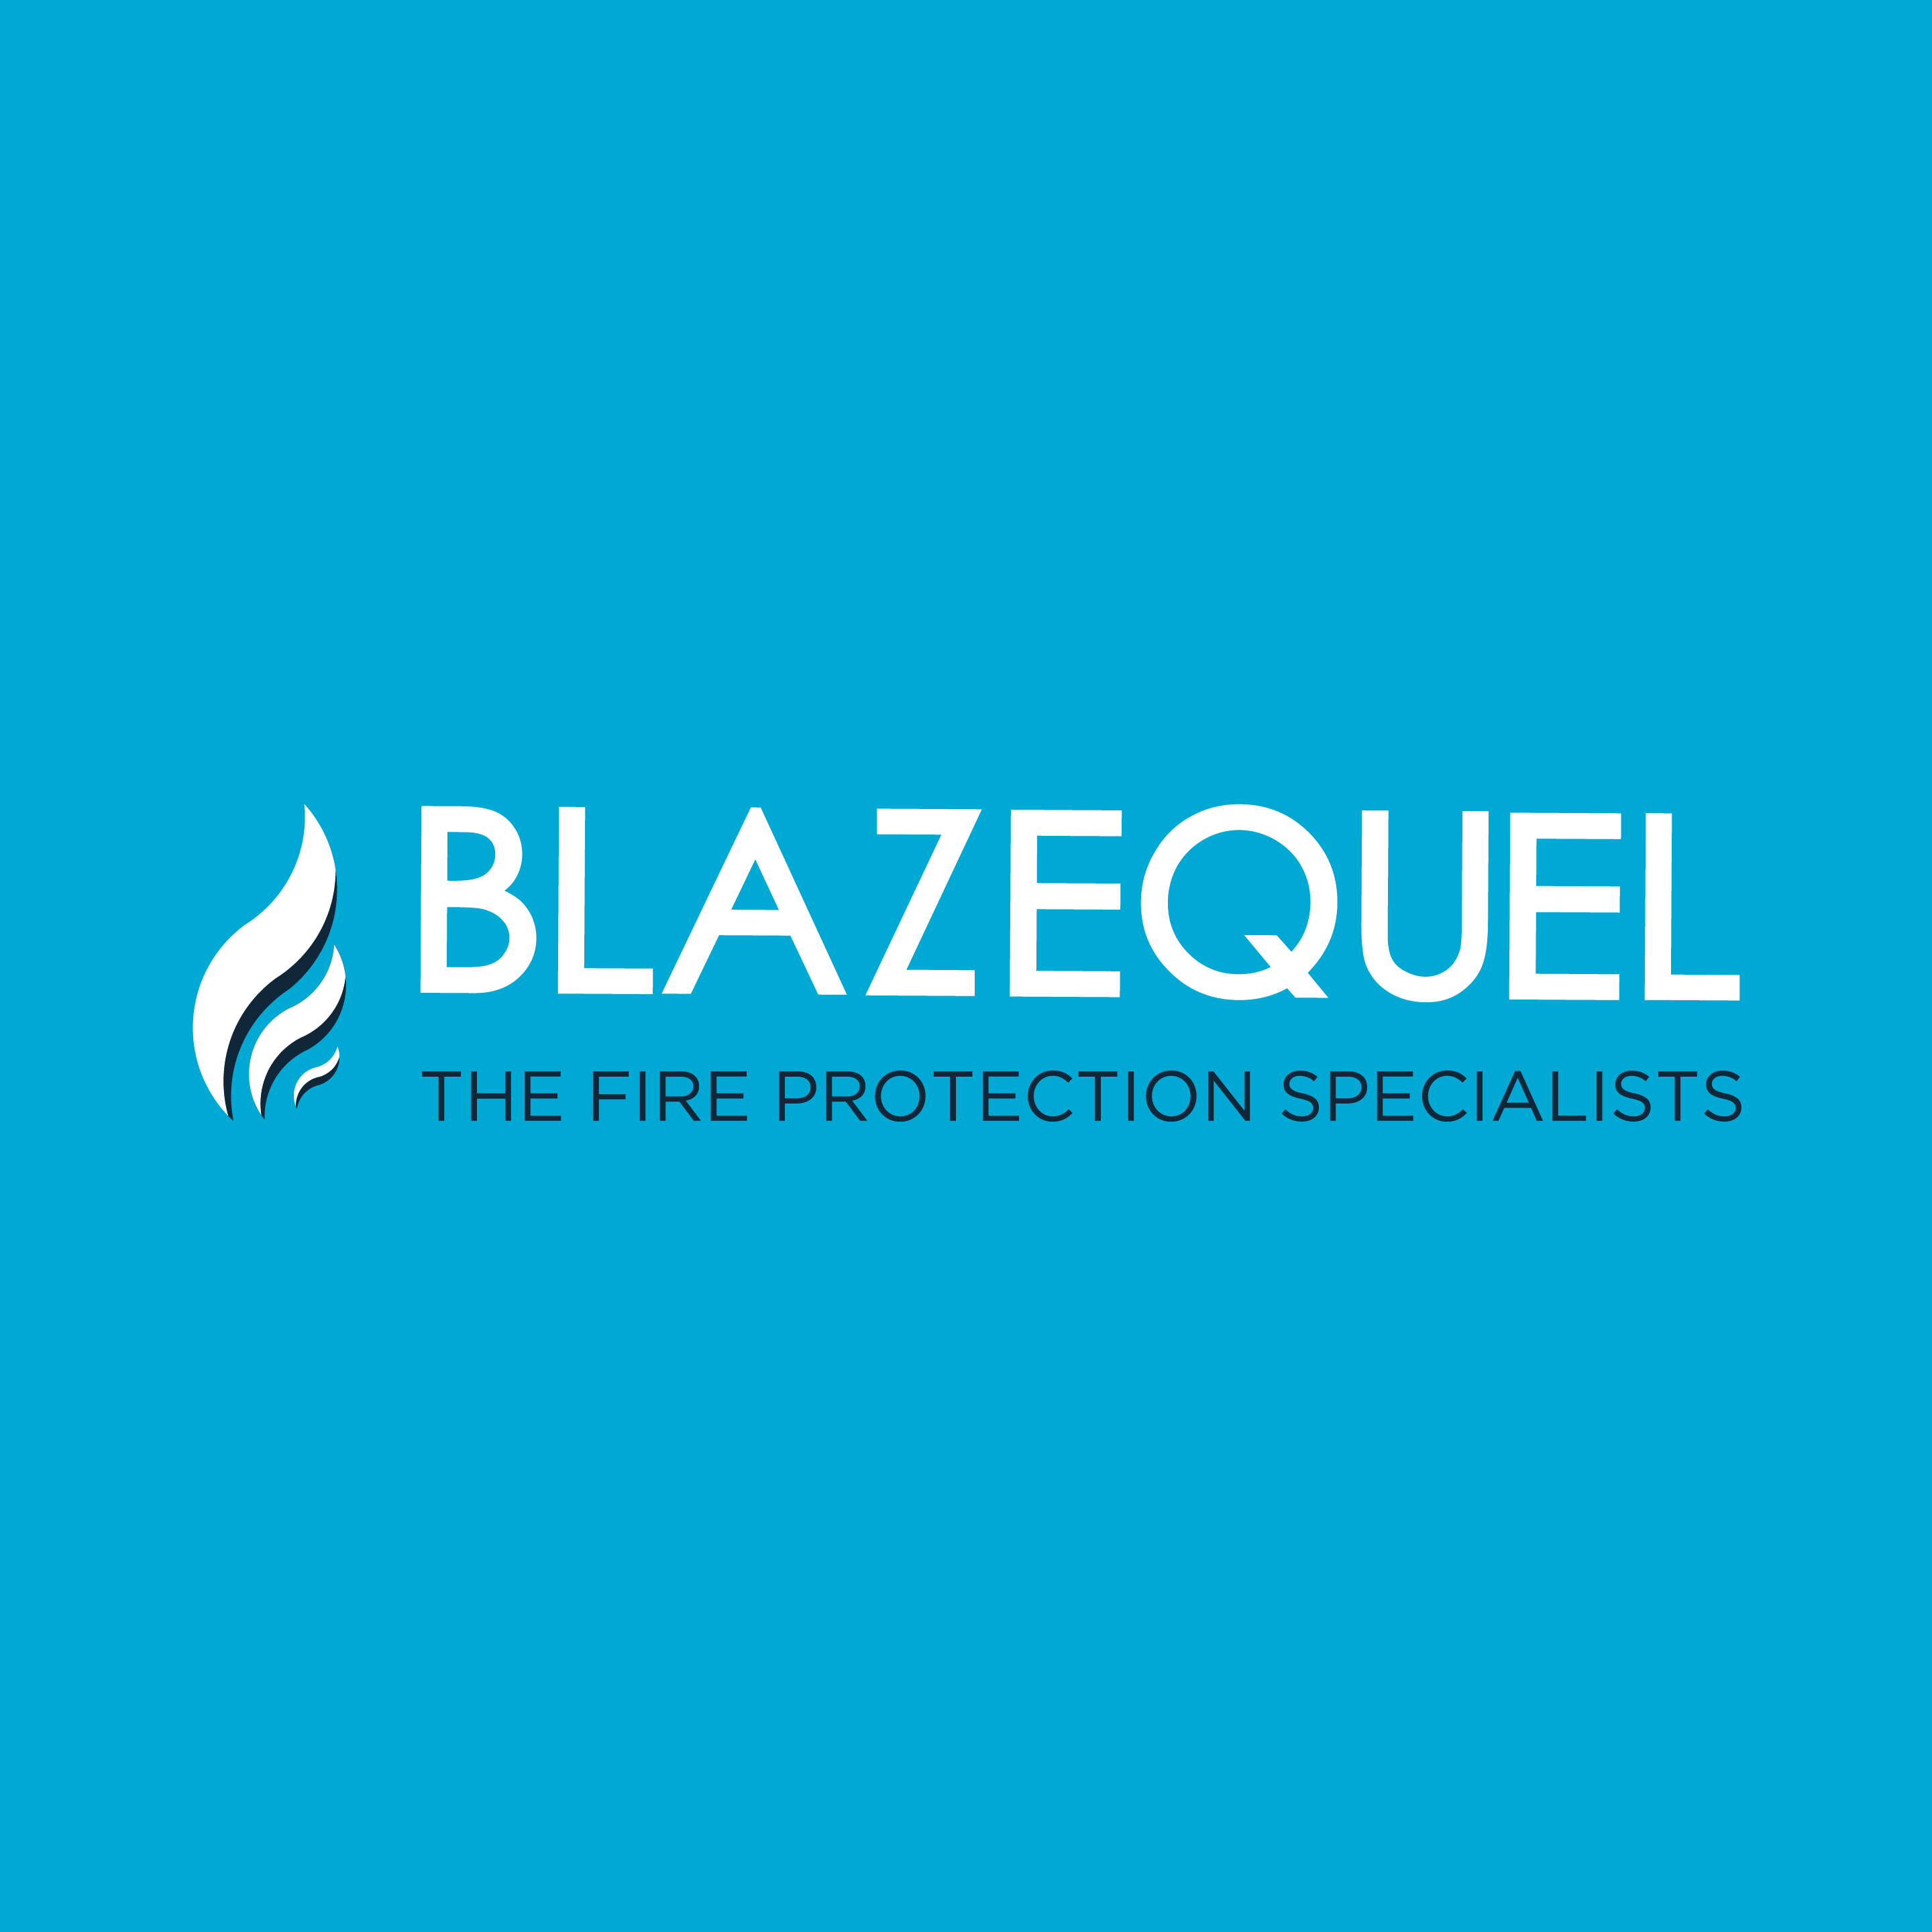 Blazequel Fire Protection Specialists